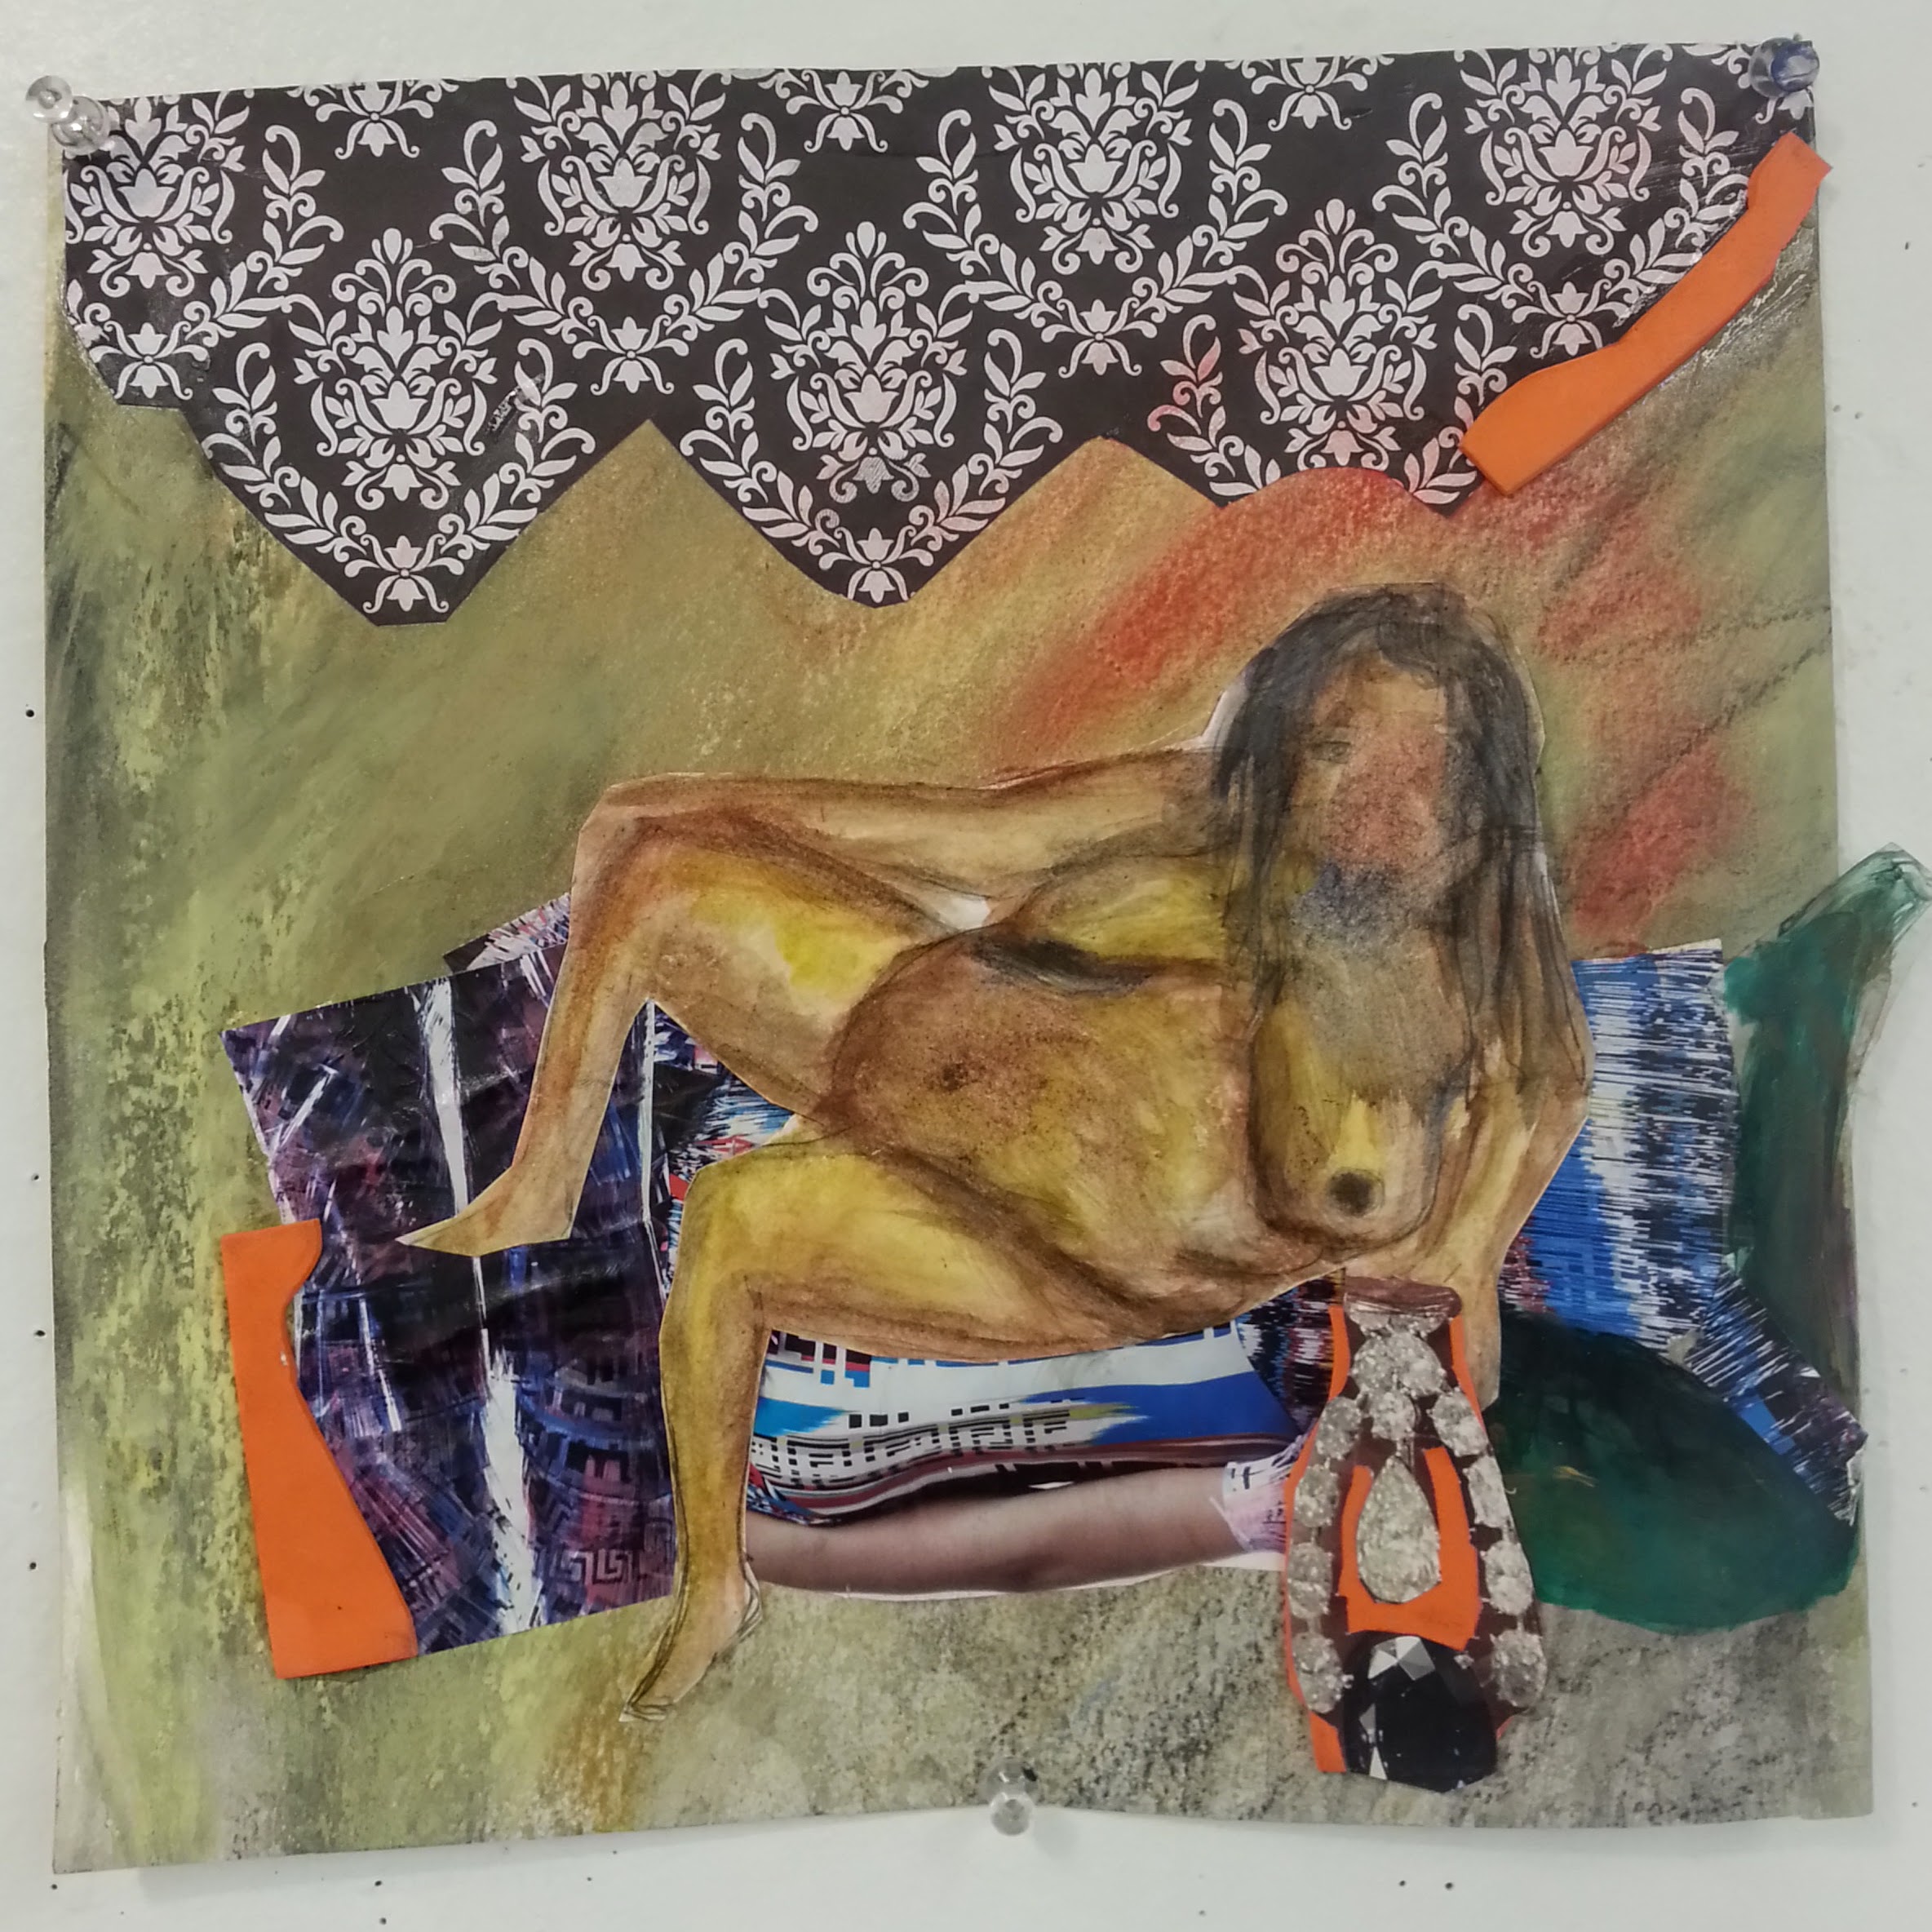 Laid and Paid, 2015